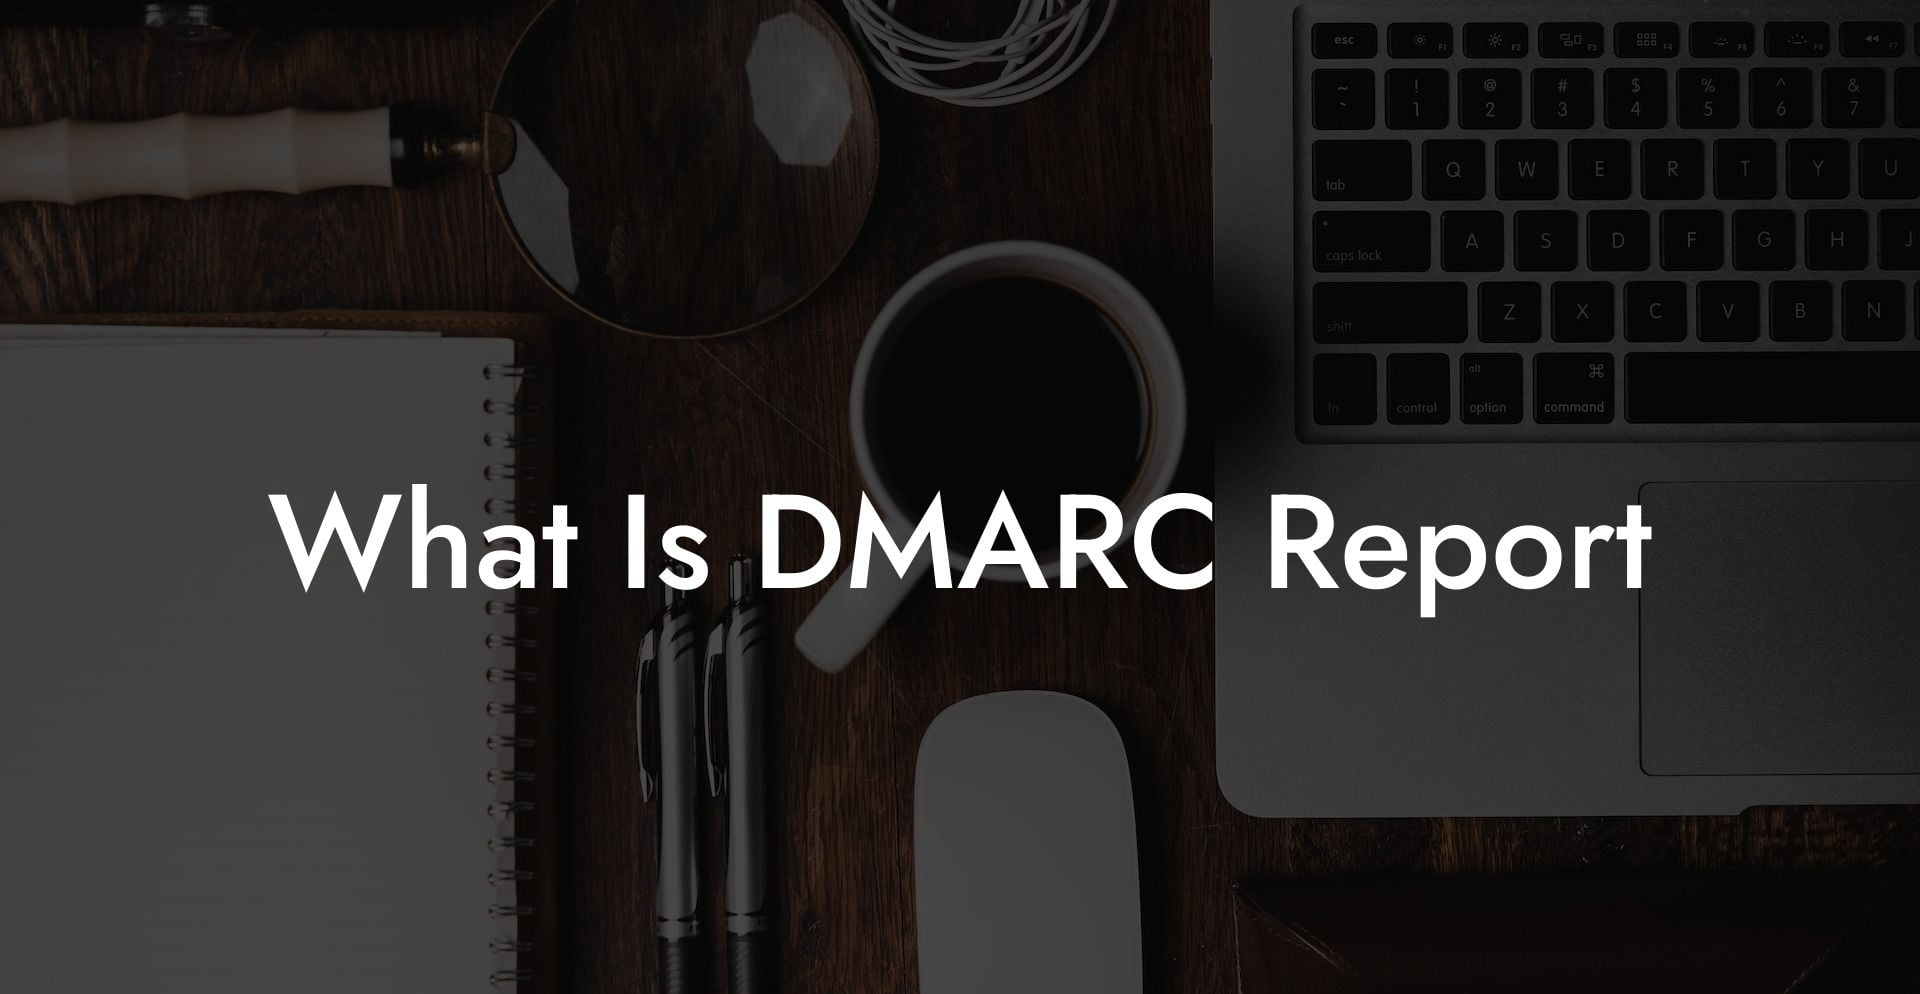 What Is DMARC Report